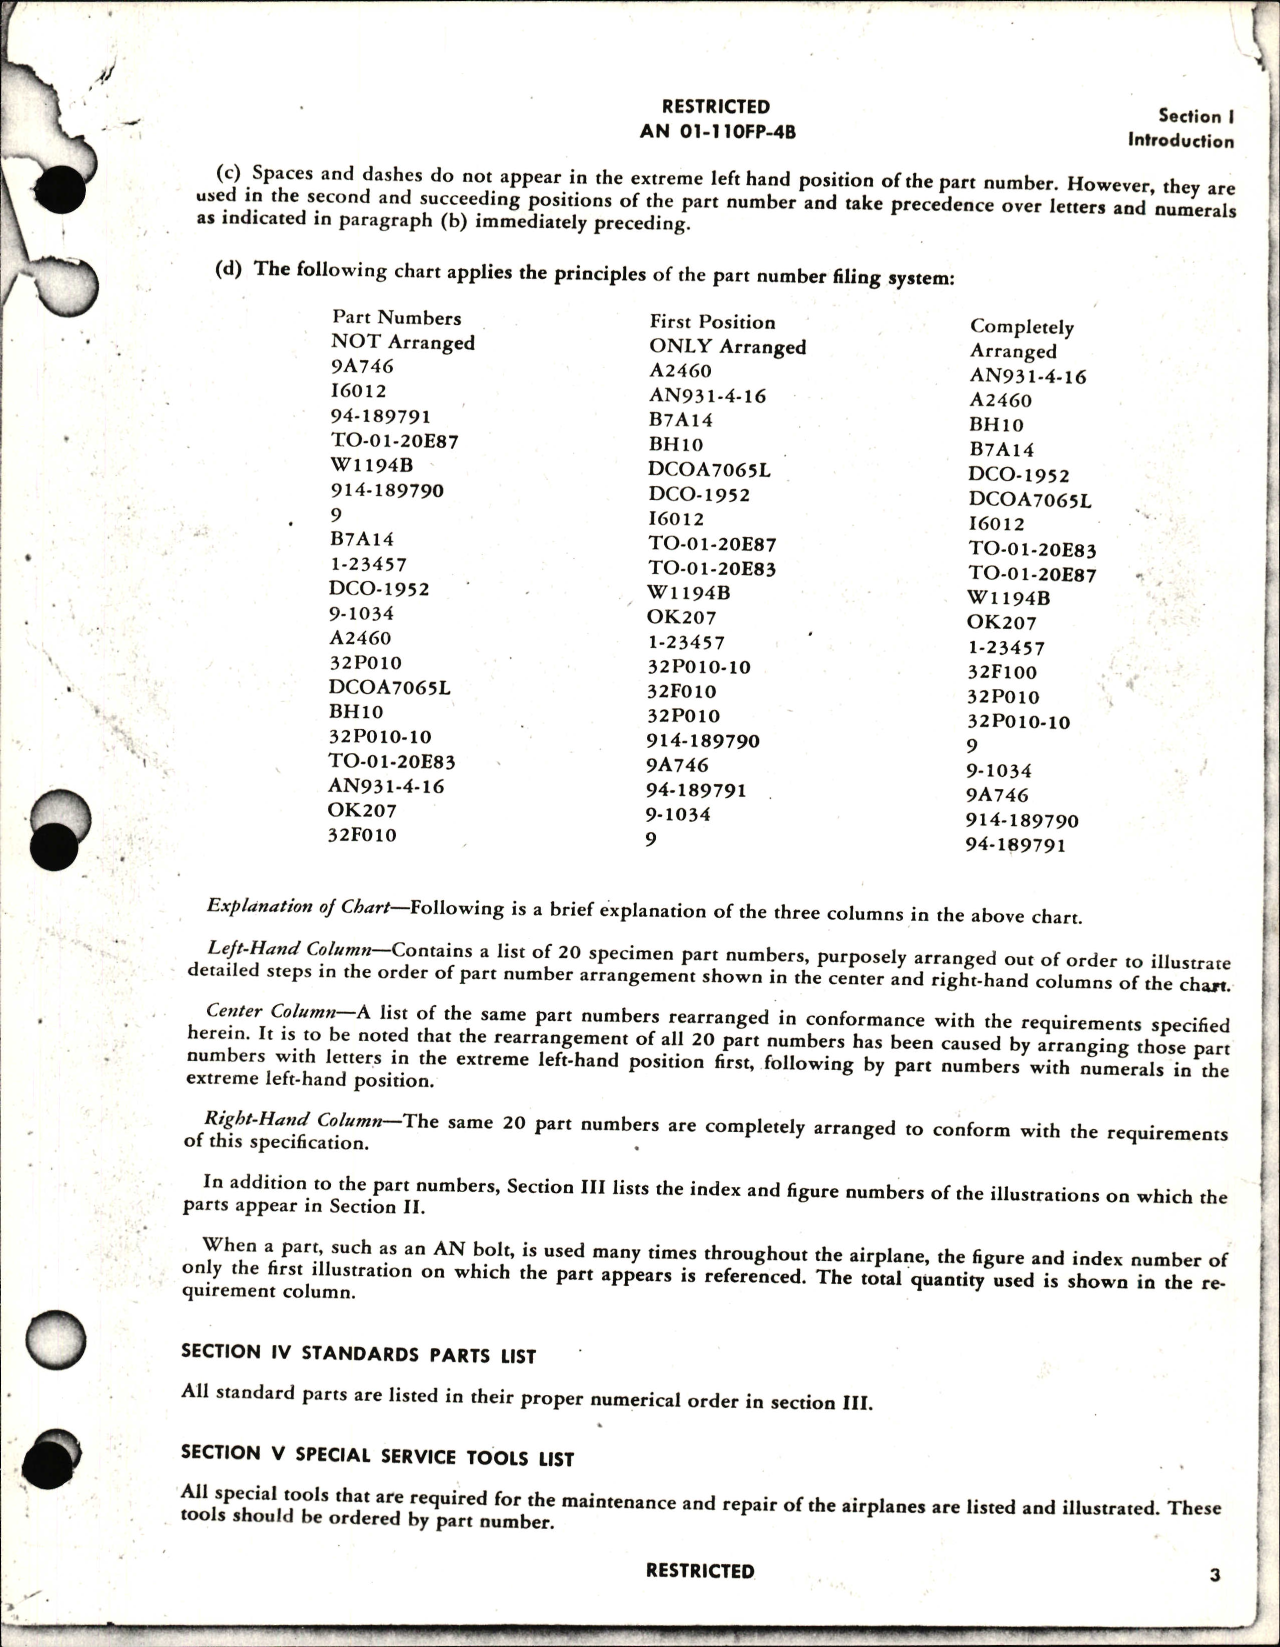 Sample page 5 from AirCorps Library document: Illustrated Parts Catalog for P-63E, WOTN